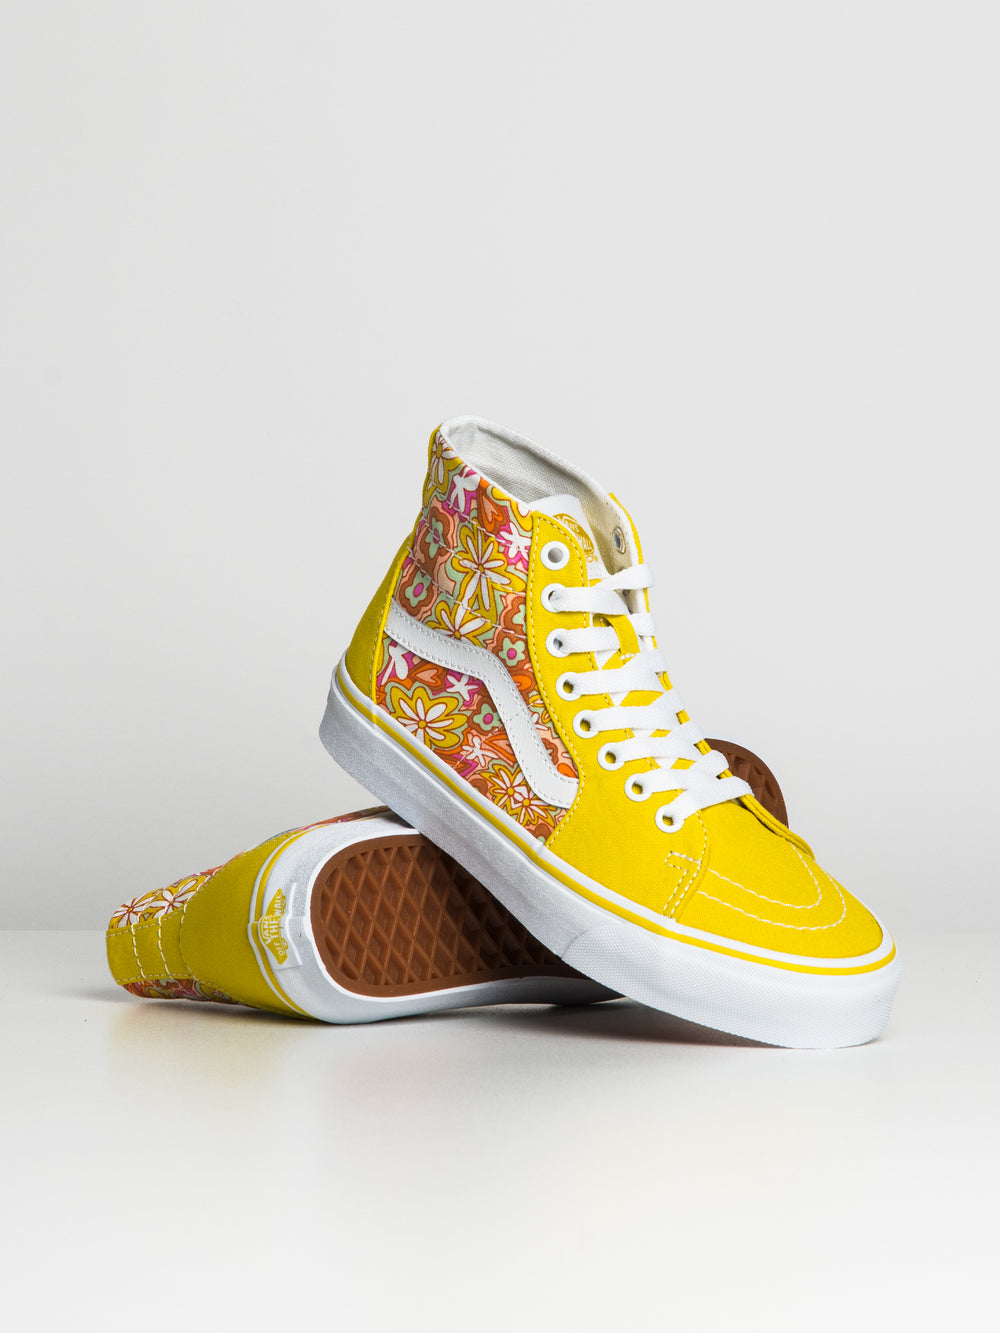 WOMENS VANS SK8 HI TAPERED PSYCHEDELIC - CLEARANCE